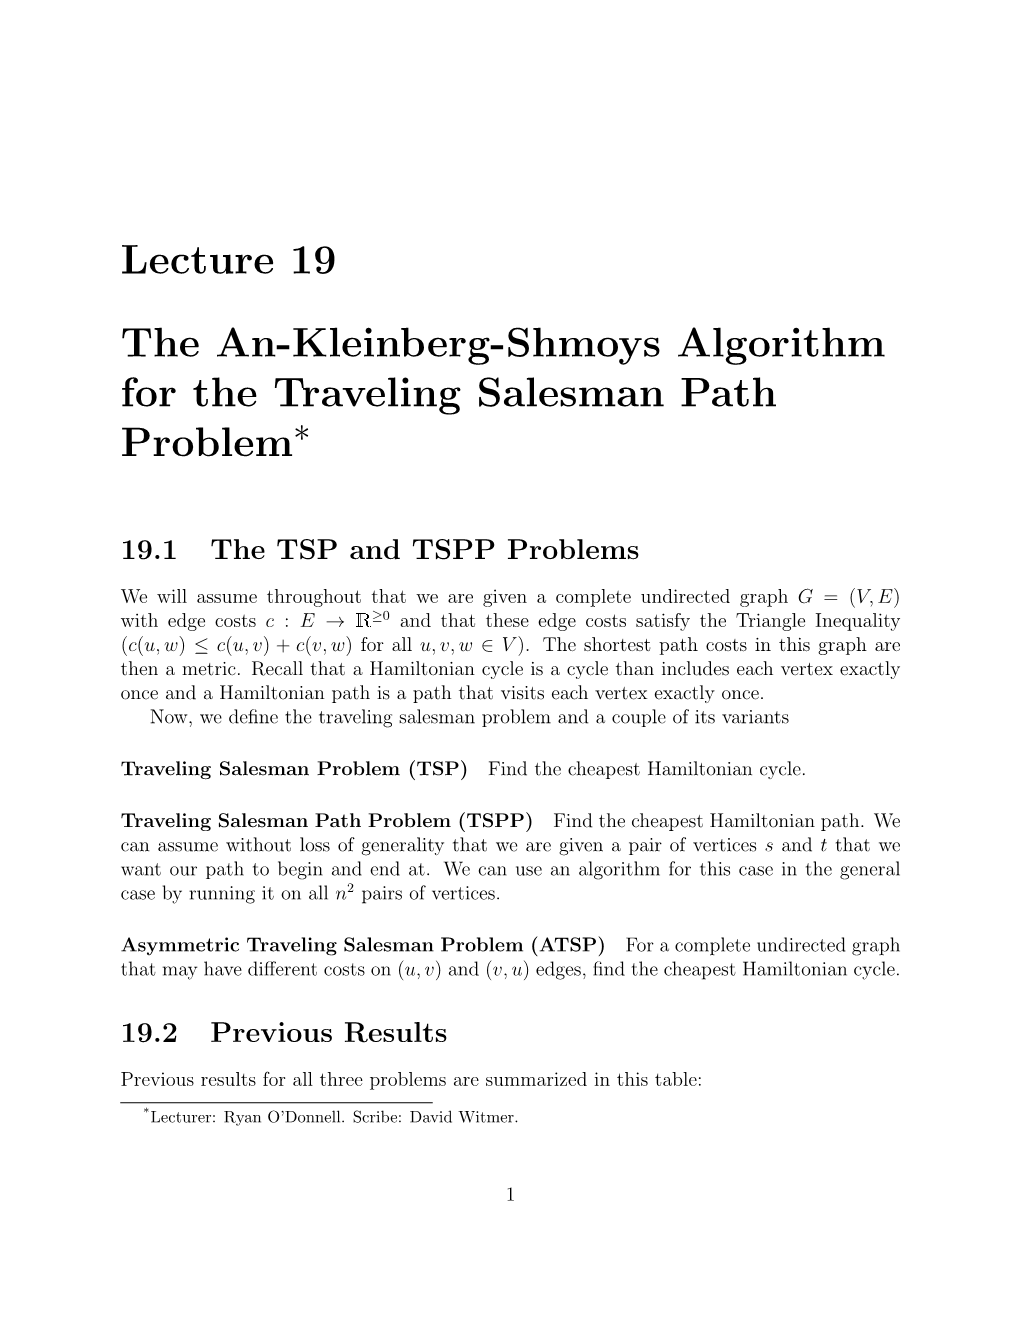 Lecture 19 the An-Kleinberg-Shmoys Algorithm for the Traveling Salesman Path Problem